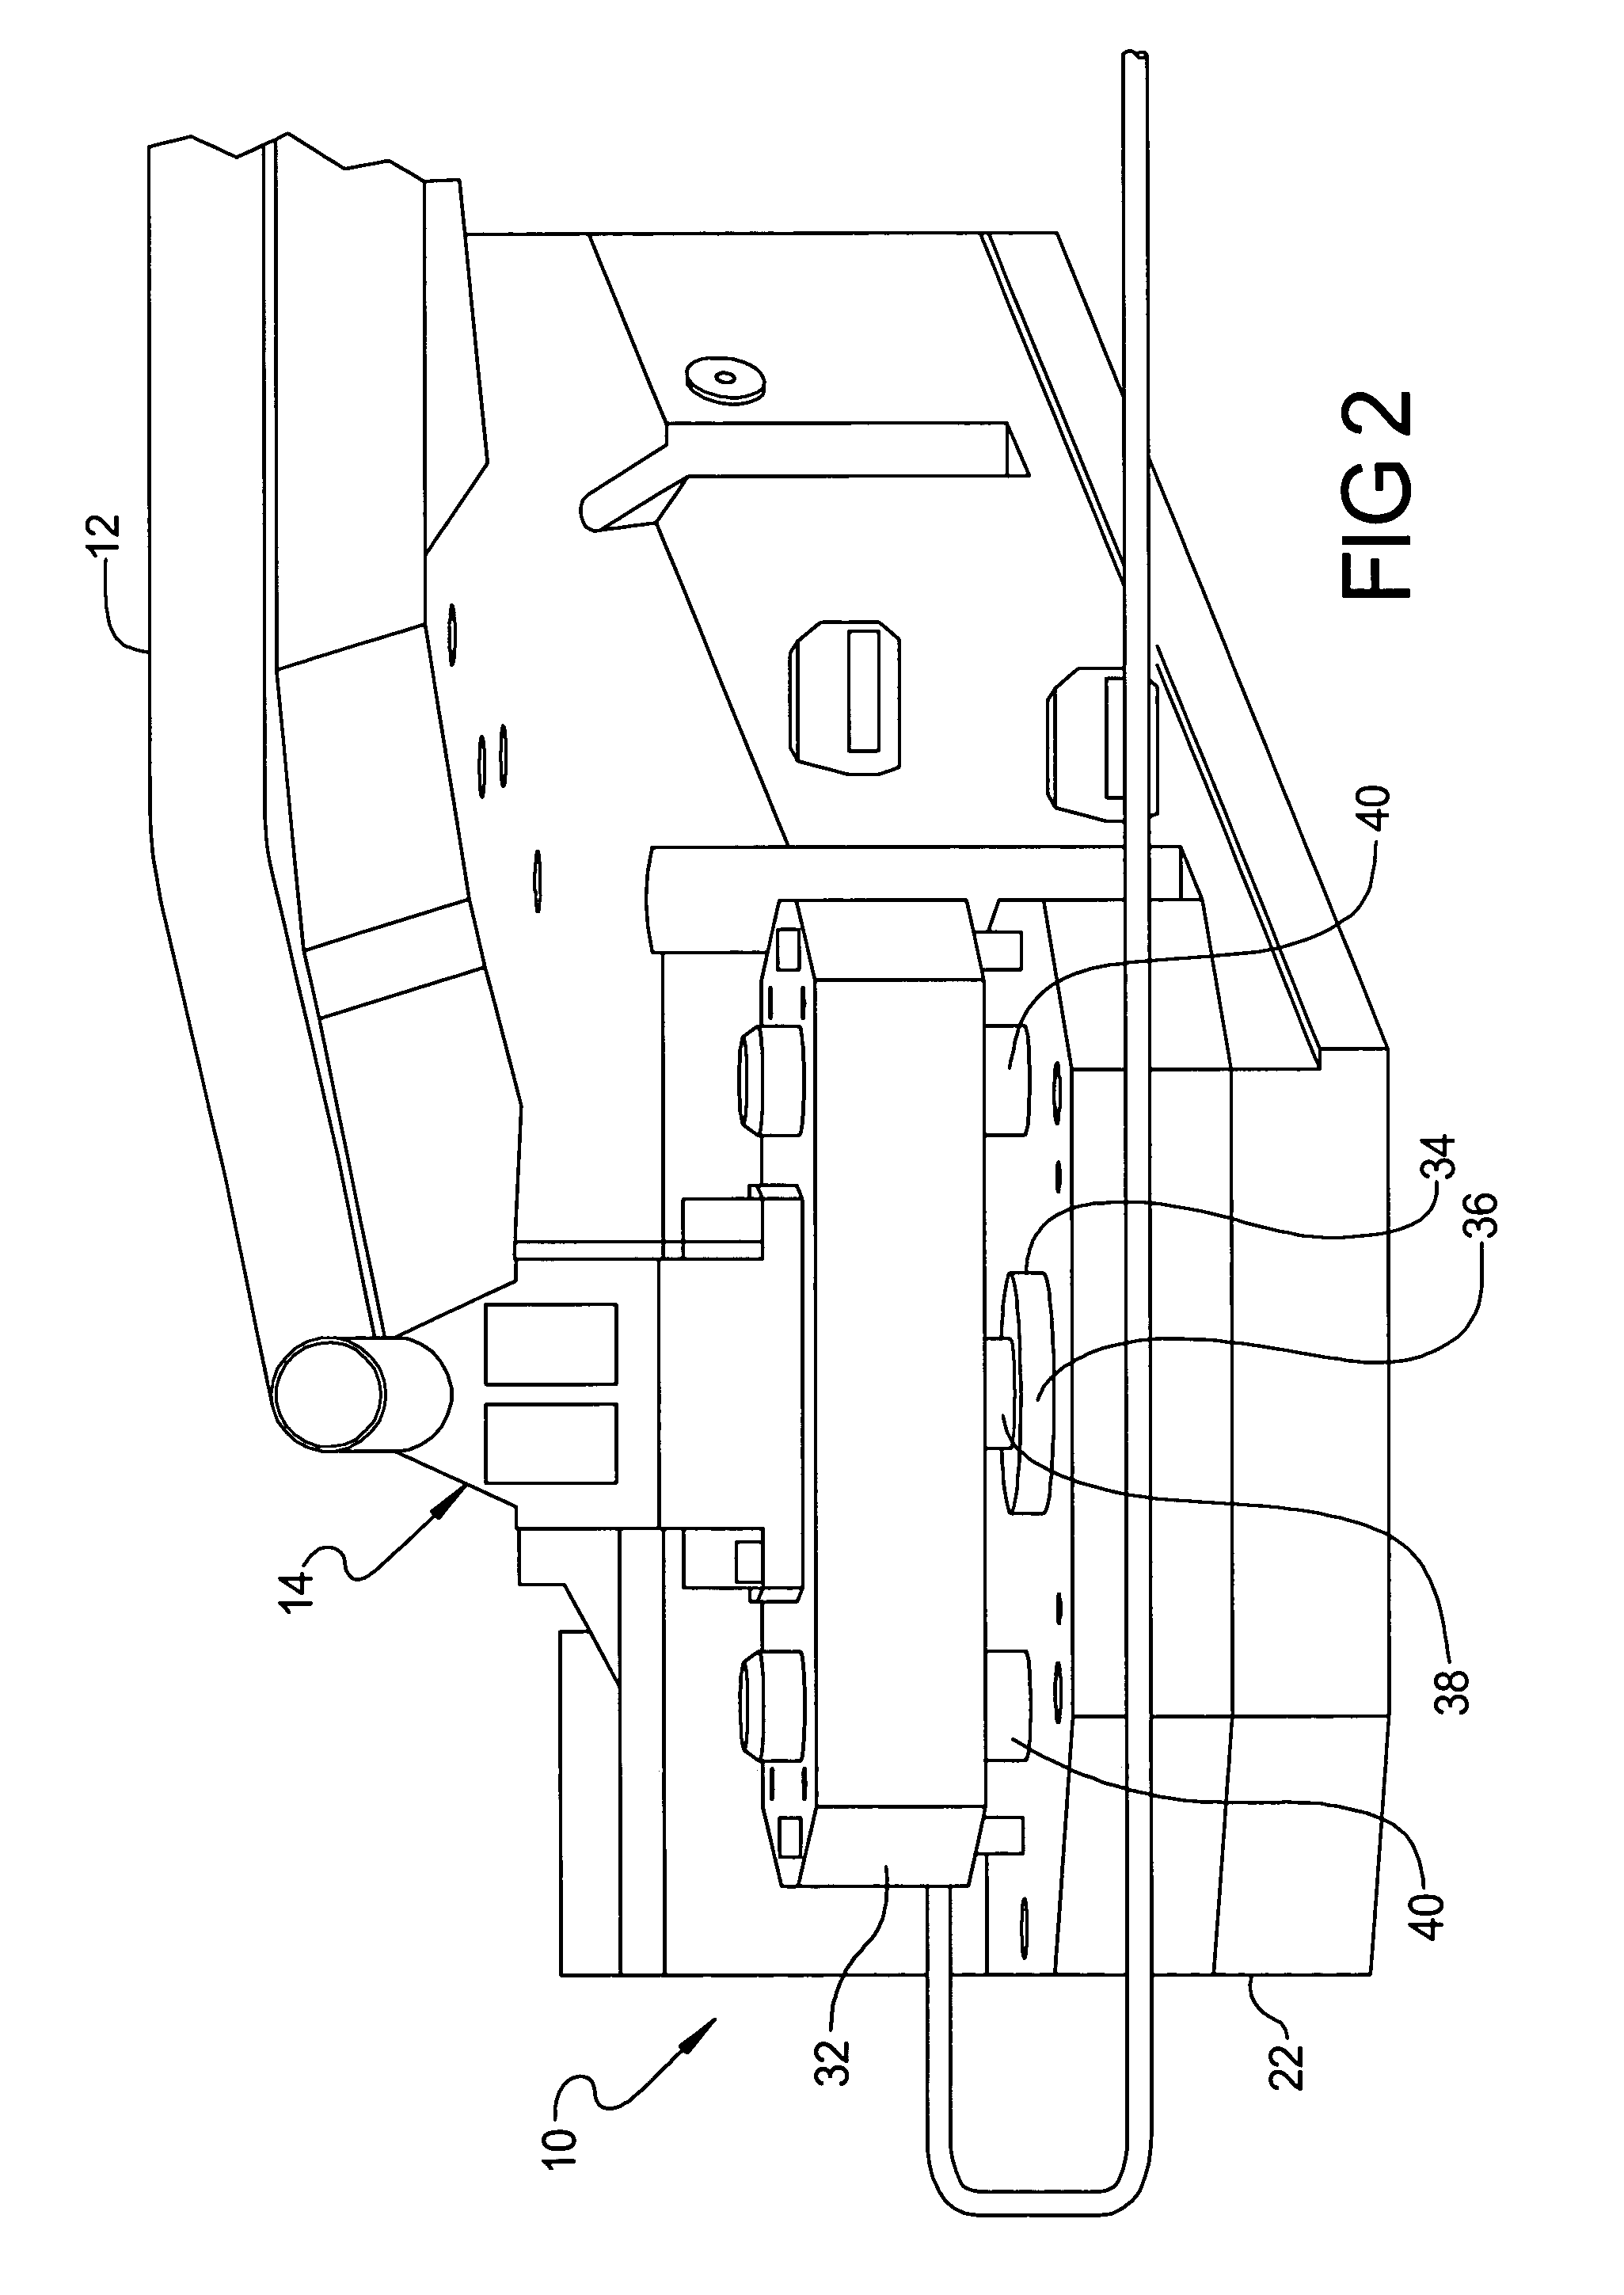 Hydroform die tube holding assembly and method of making same